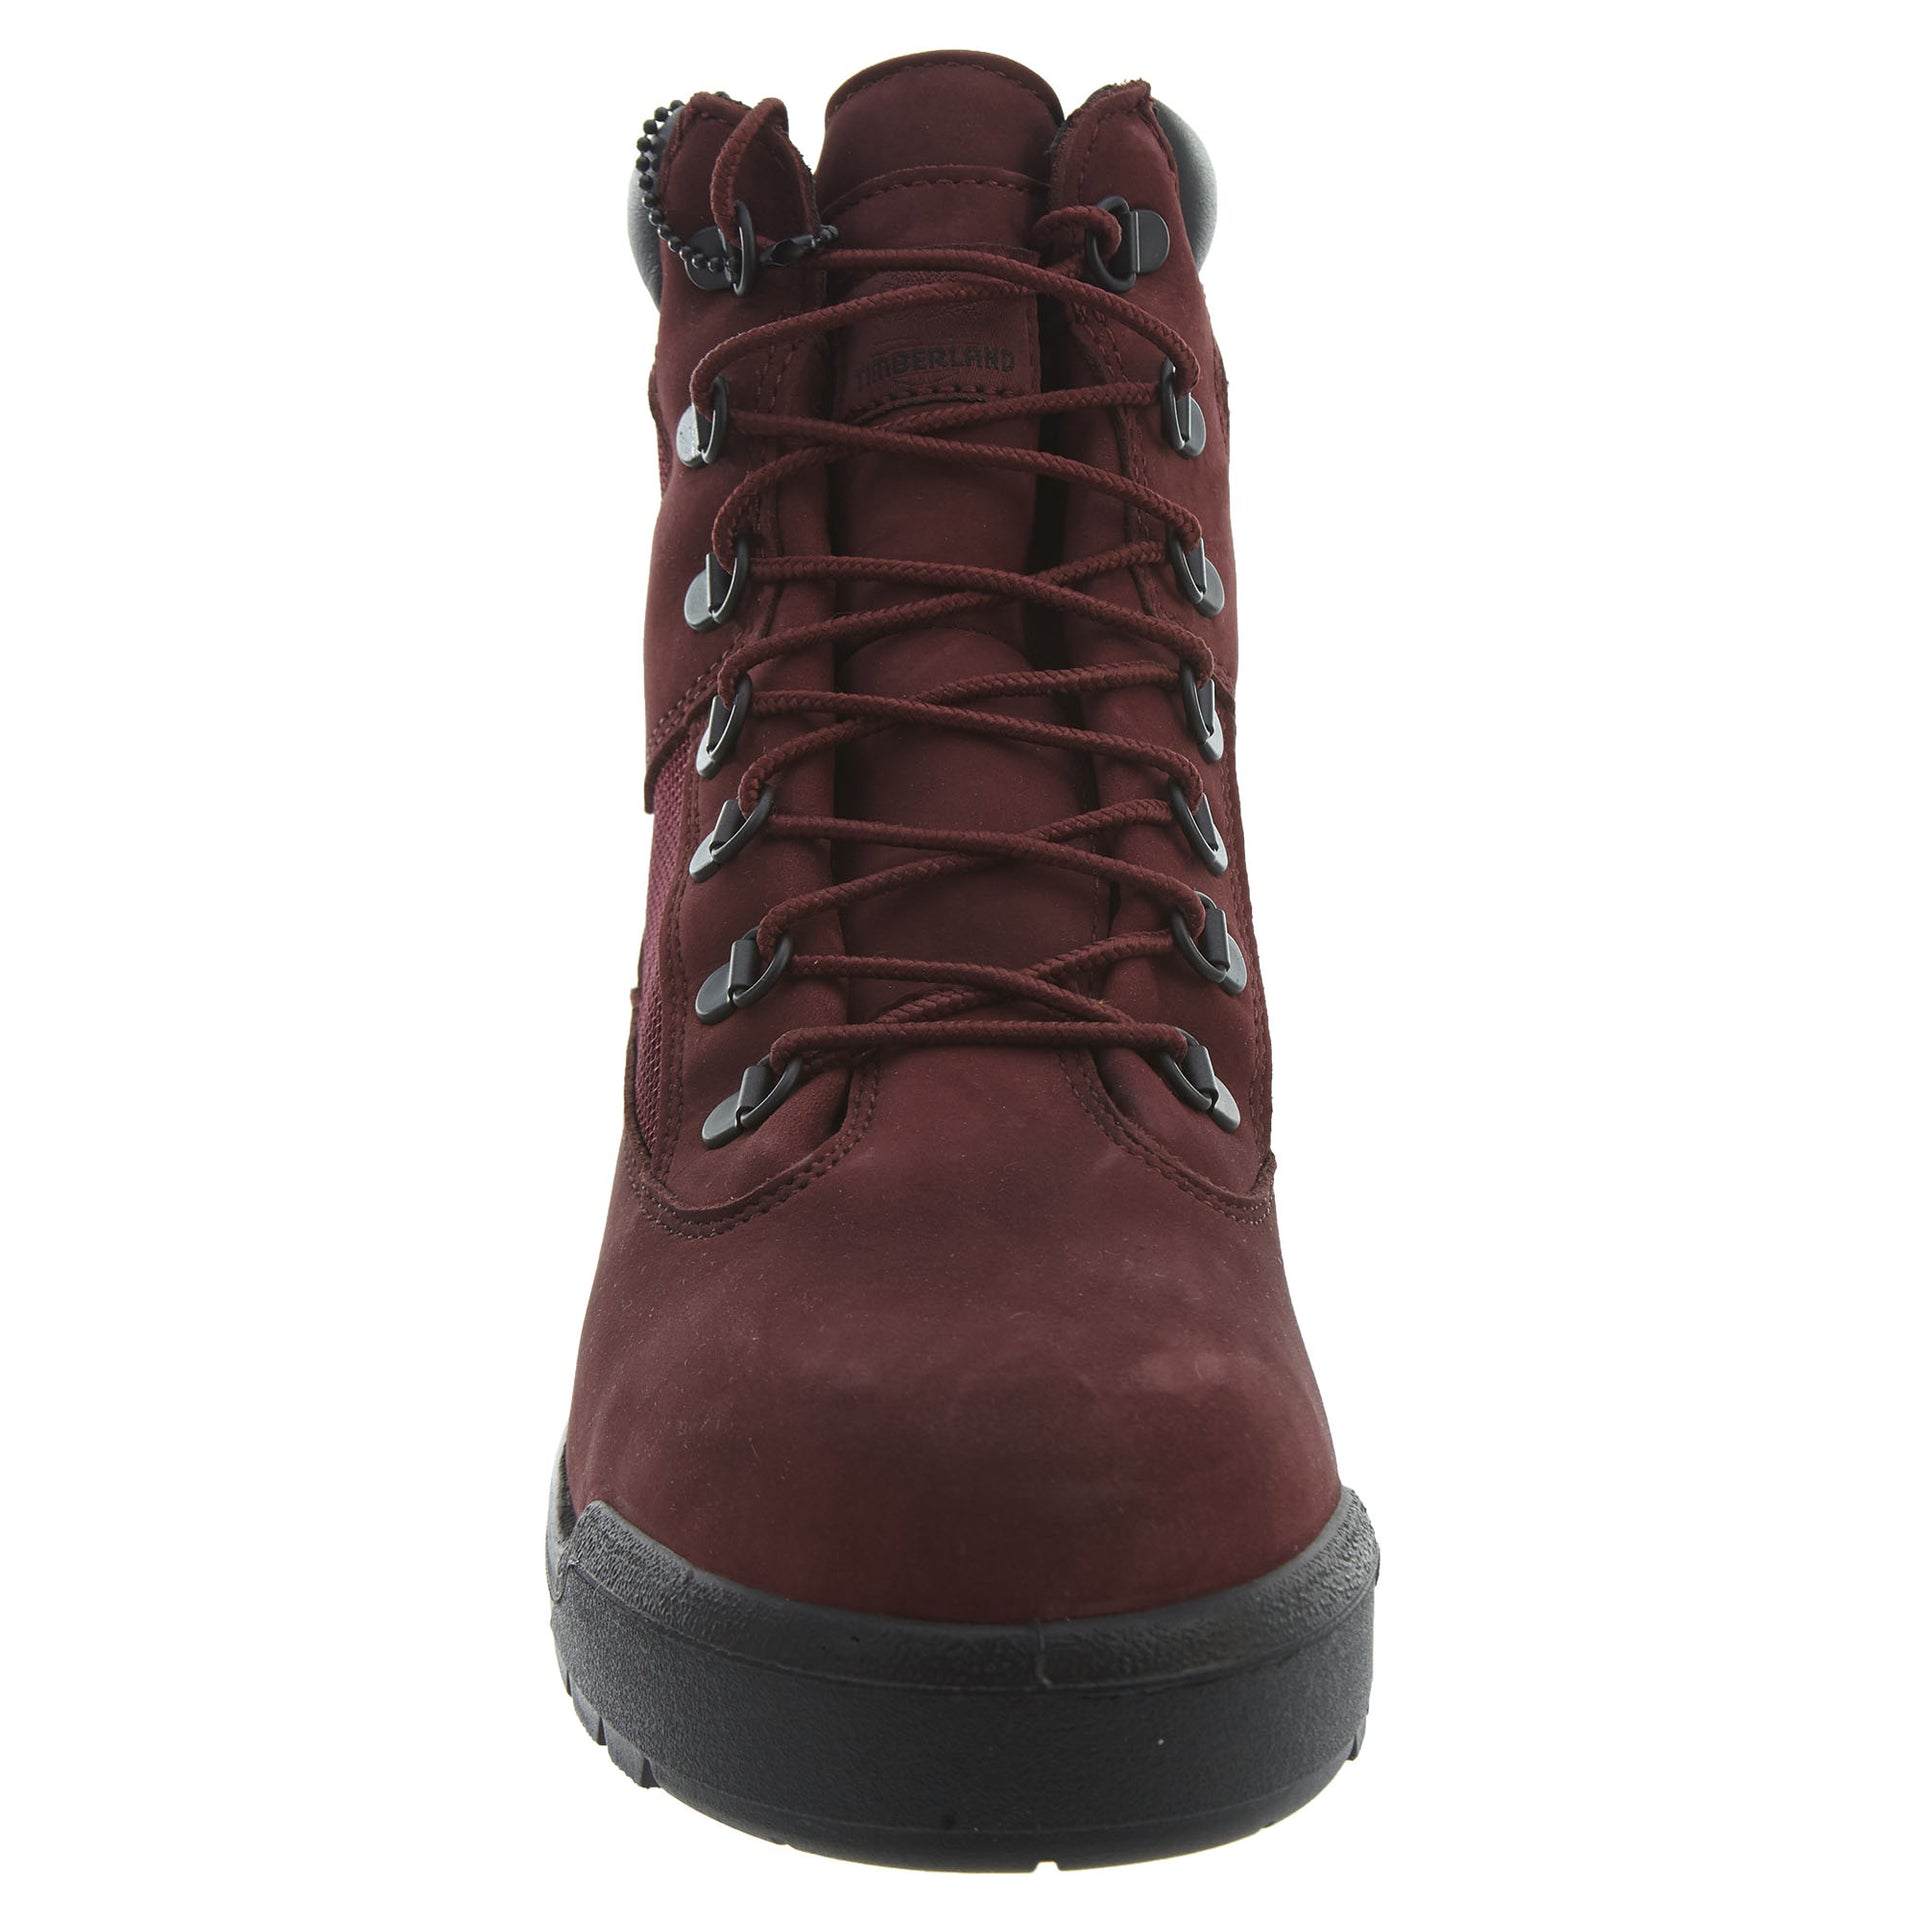 Timberland 6" Field Boots Mens Style : Tb0a1a2x